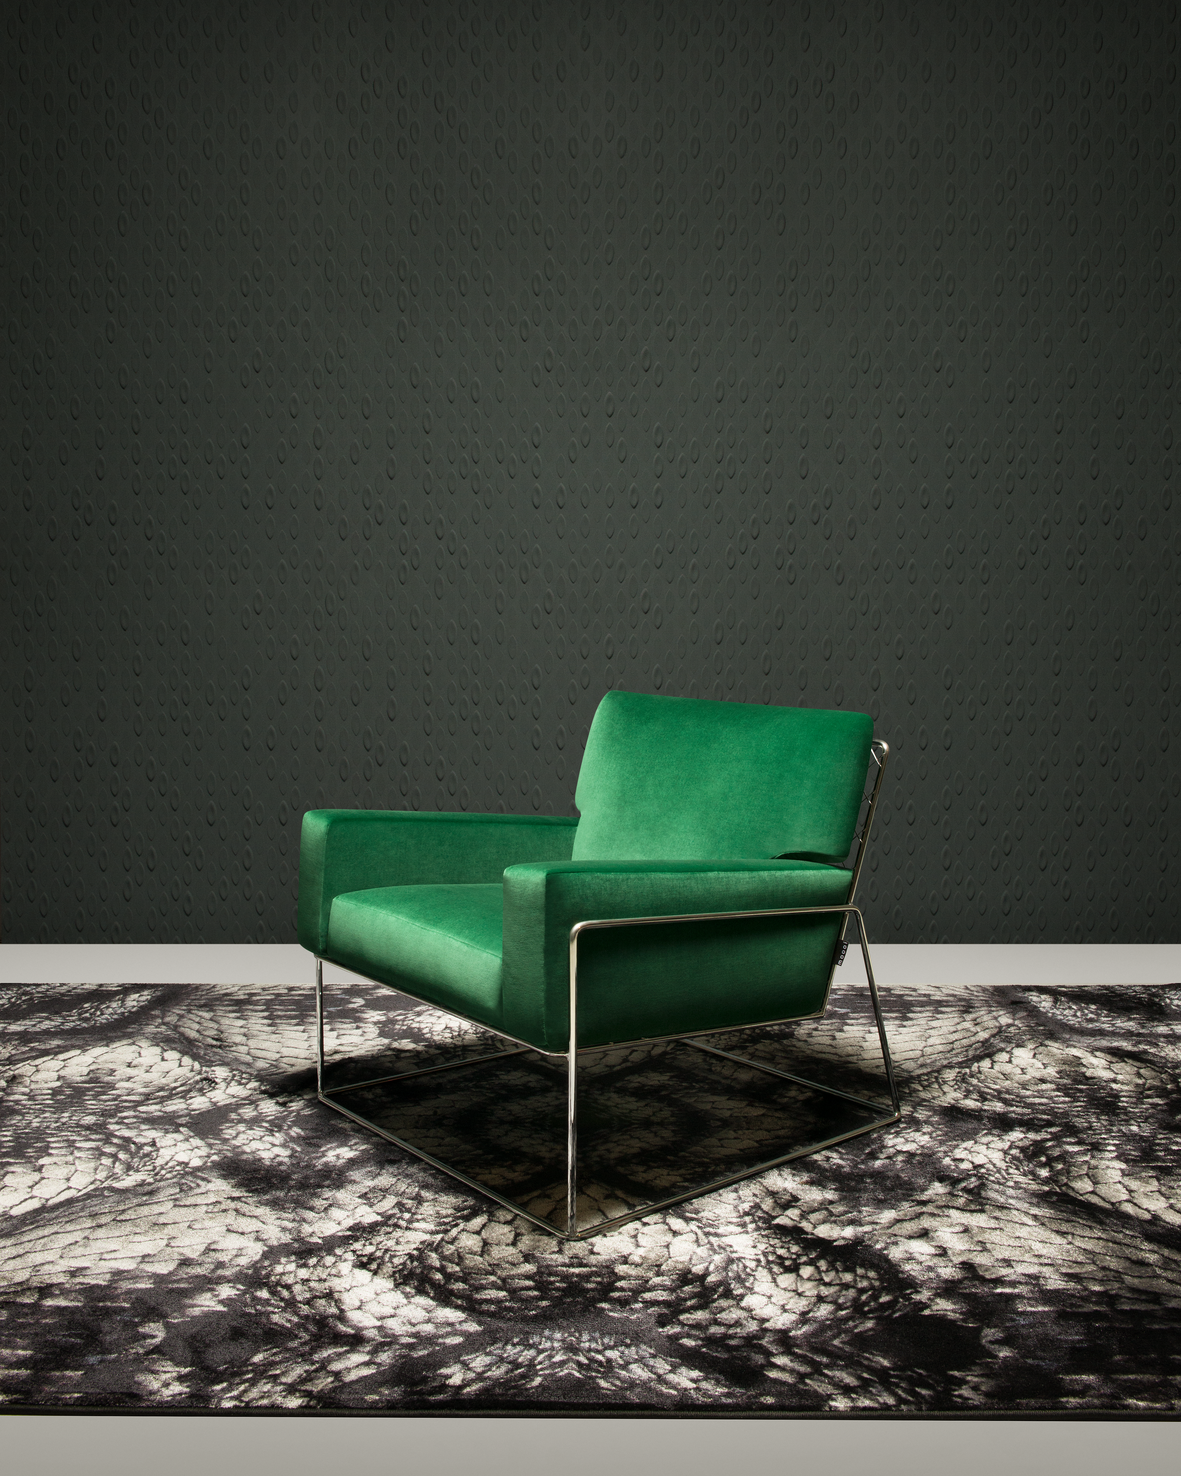 Poetic composition Charles Armchair green, Moooi Carpet and Moooi Wallcovering dark